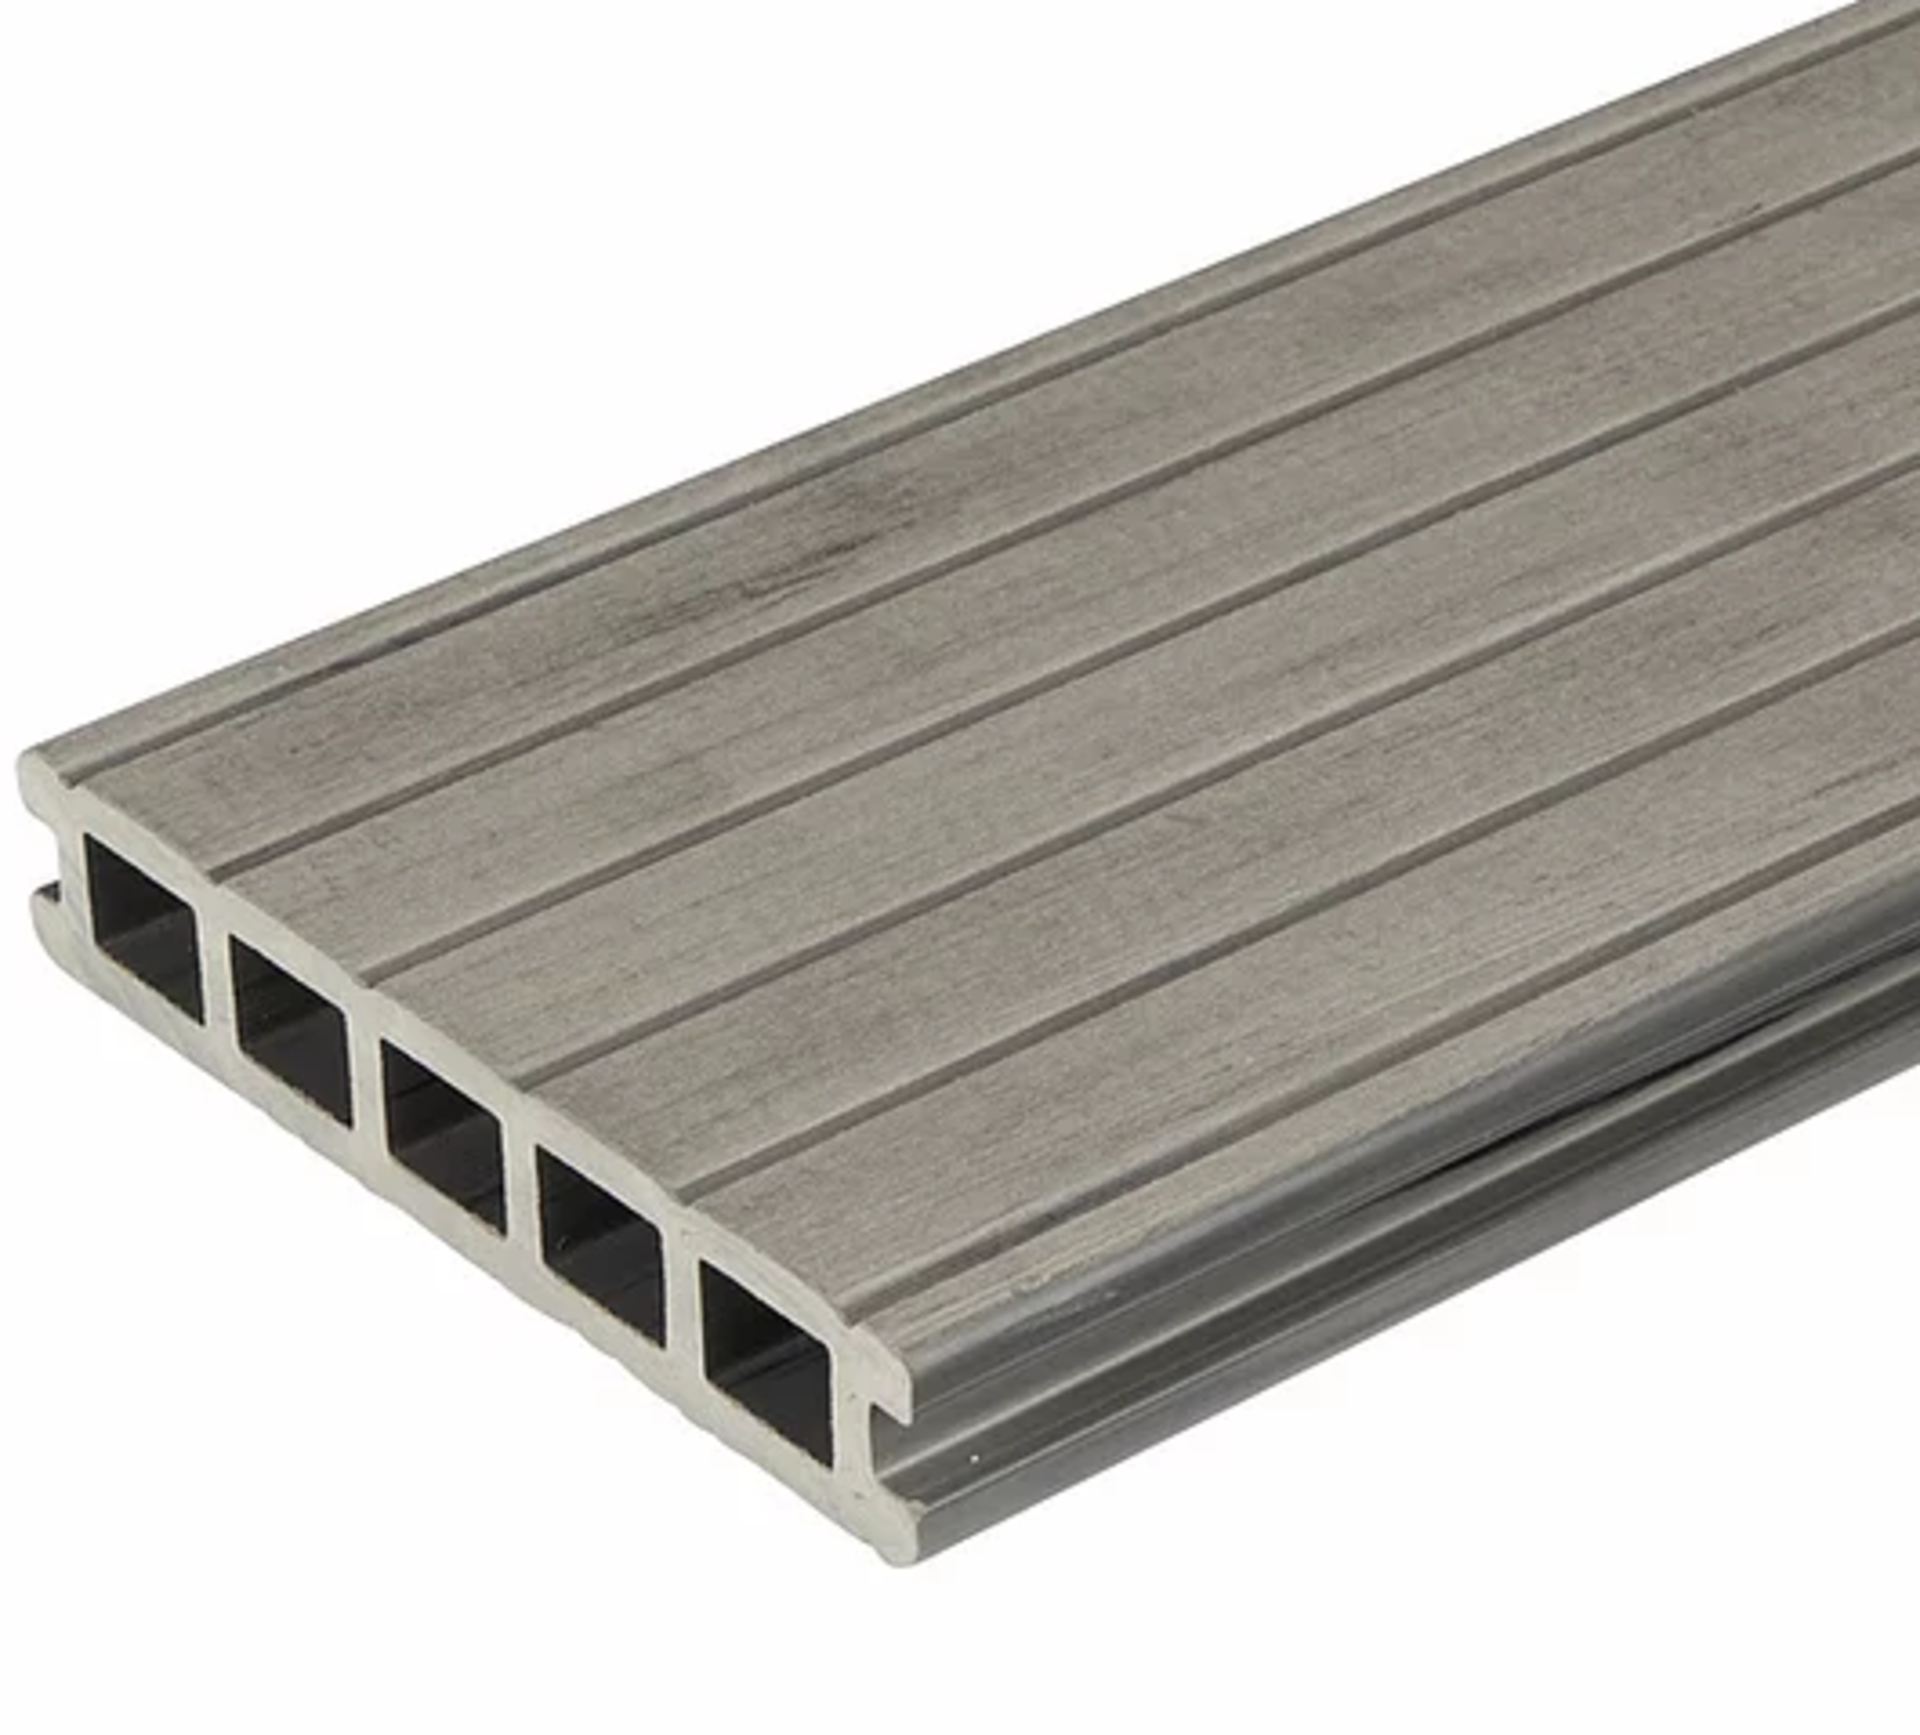 * 20 WPC Composite Light Grey Double sided Embossed Woodgrain Decking Boards 2900mm x 146mm x 25mm - Image 3 of 4